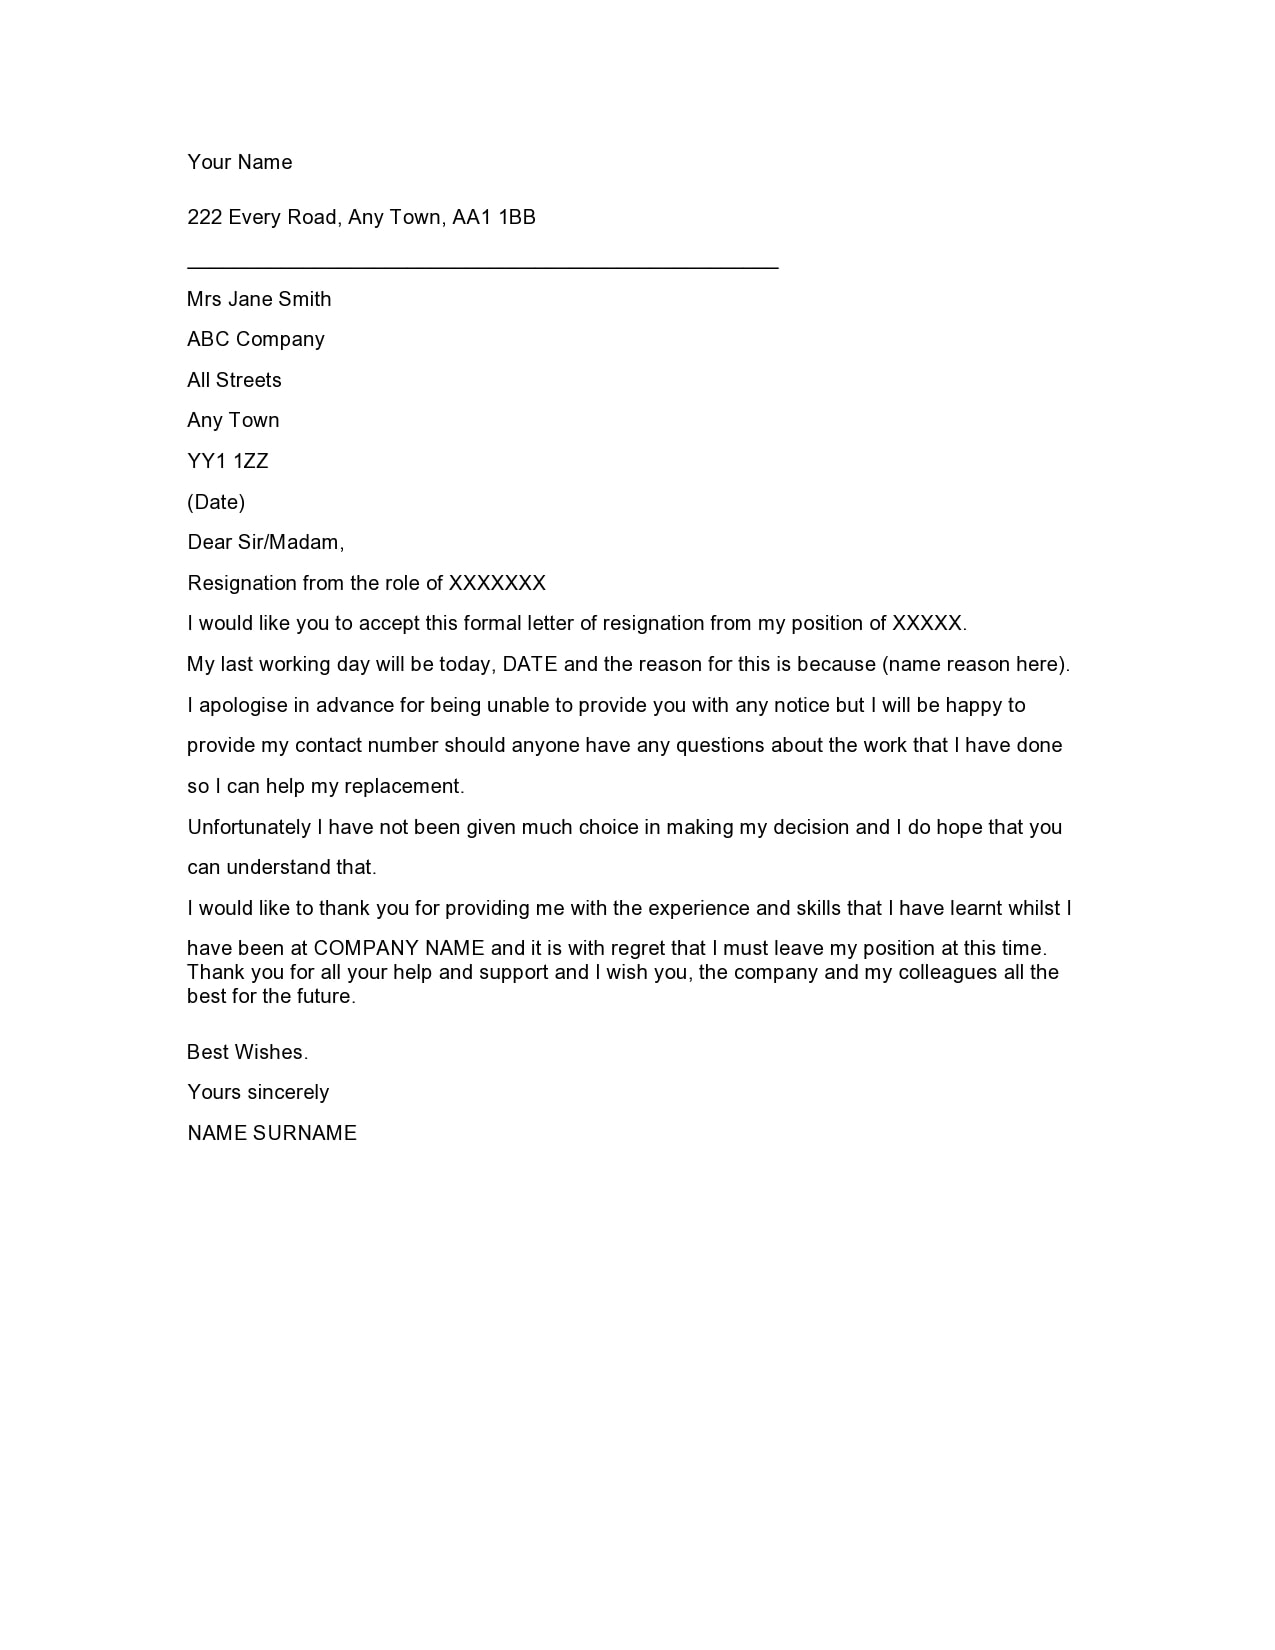 real-tips-about-resignation-letter-with-immediate-effect-no-notice